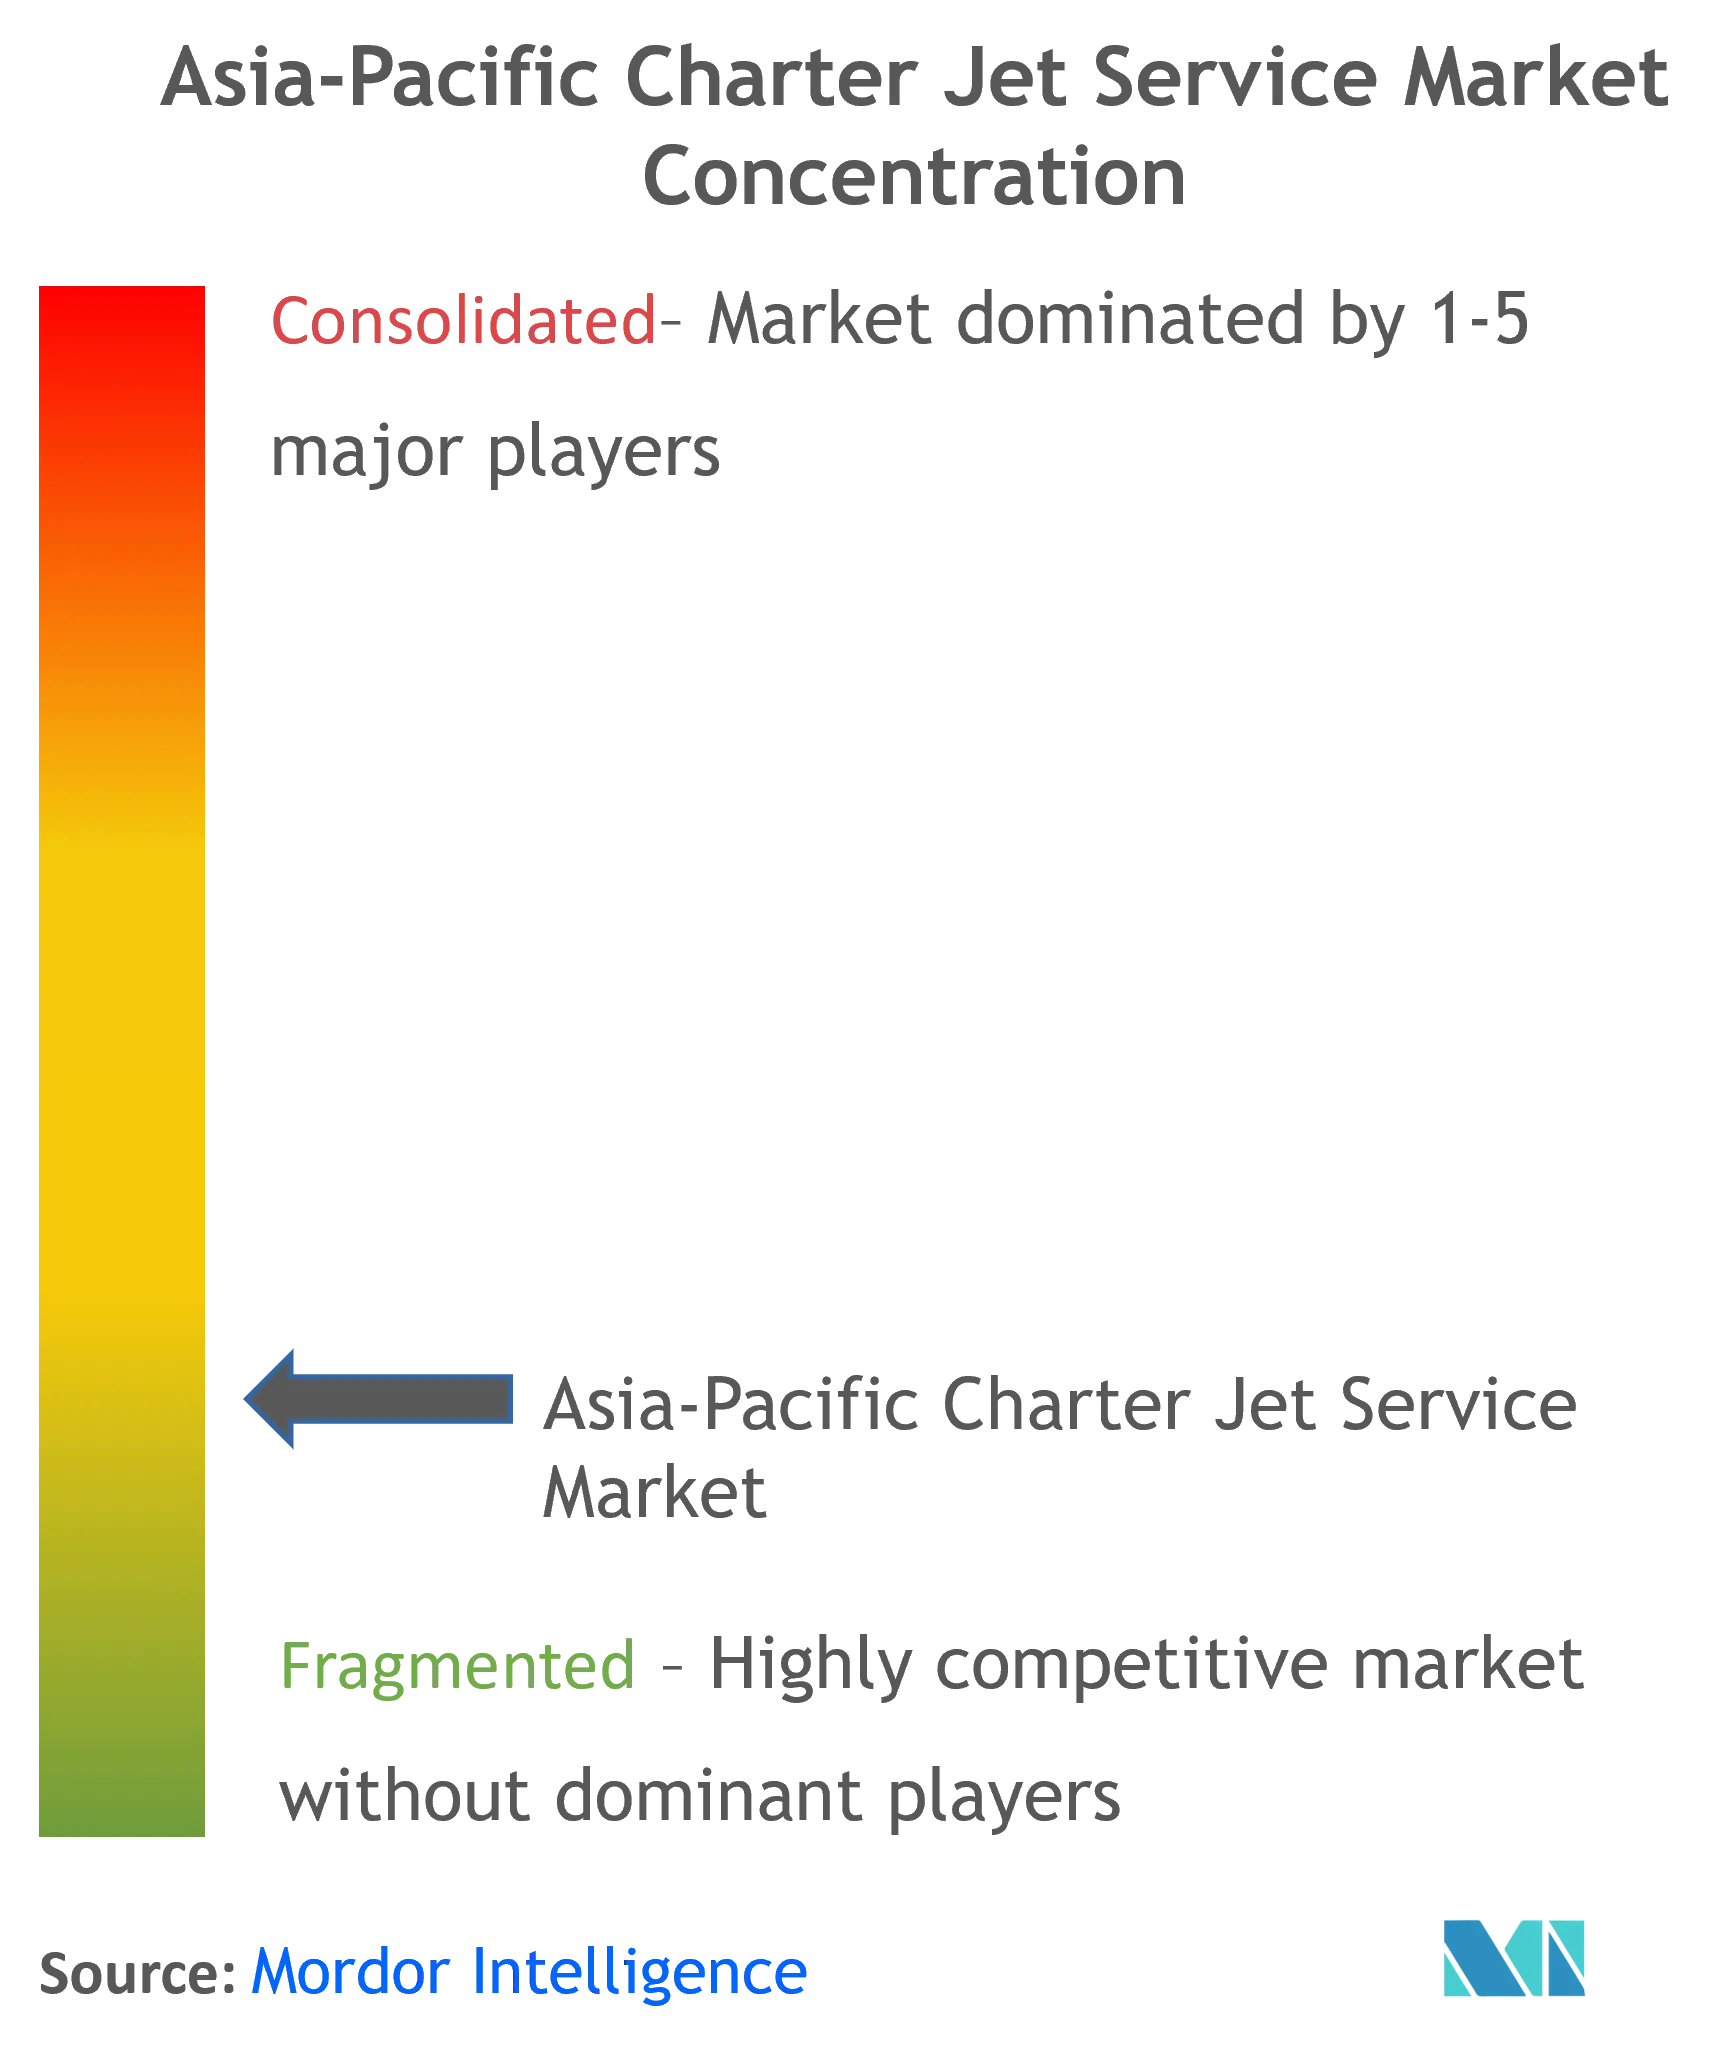 Asia-Pacific Charter Jet Service Market Concentration